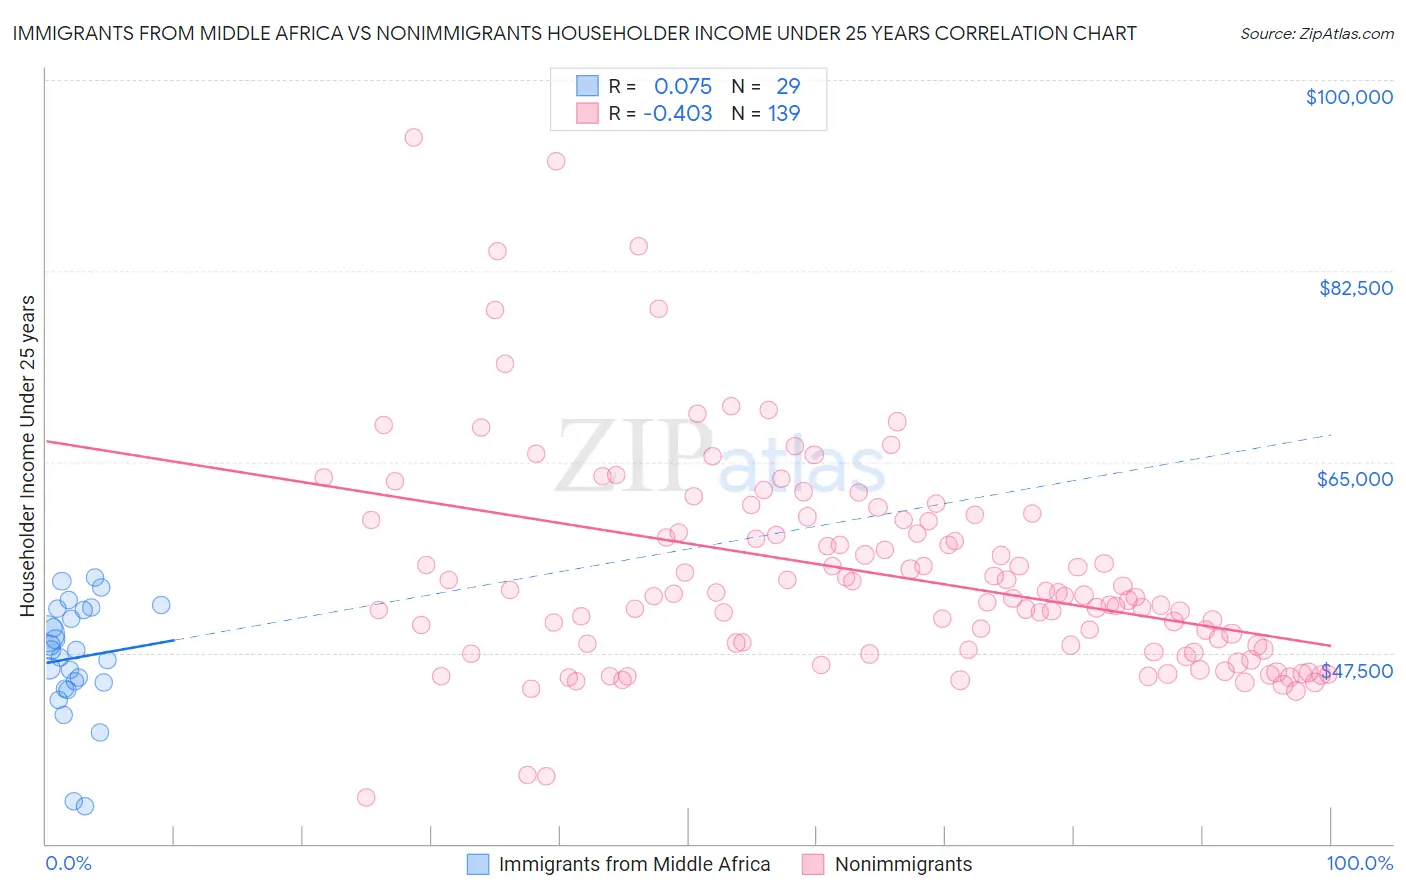 Immigrants from Middle Africa vs Nonimmigrants Householder Income Under 25 years